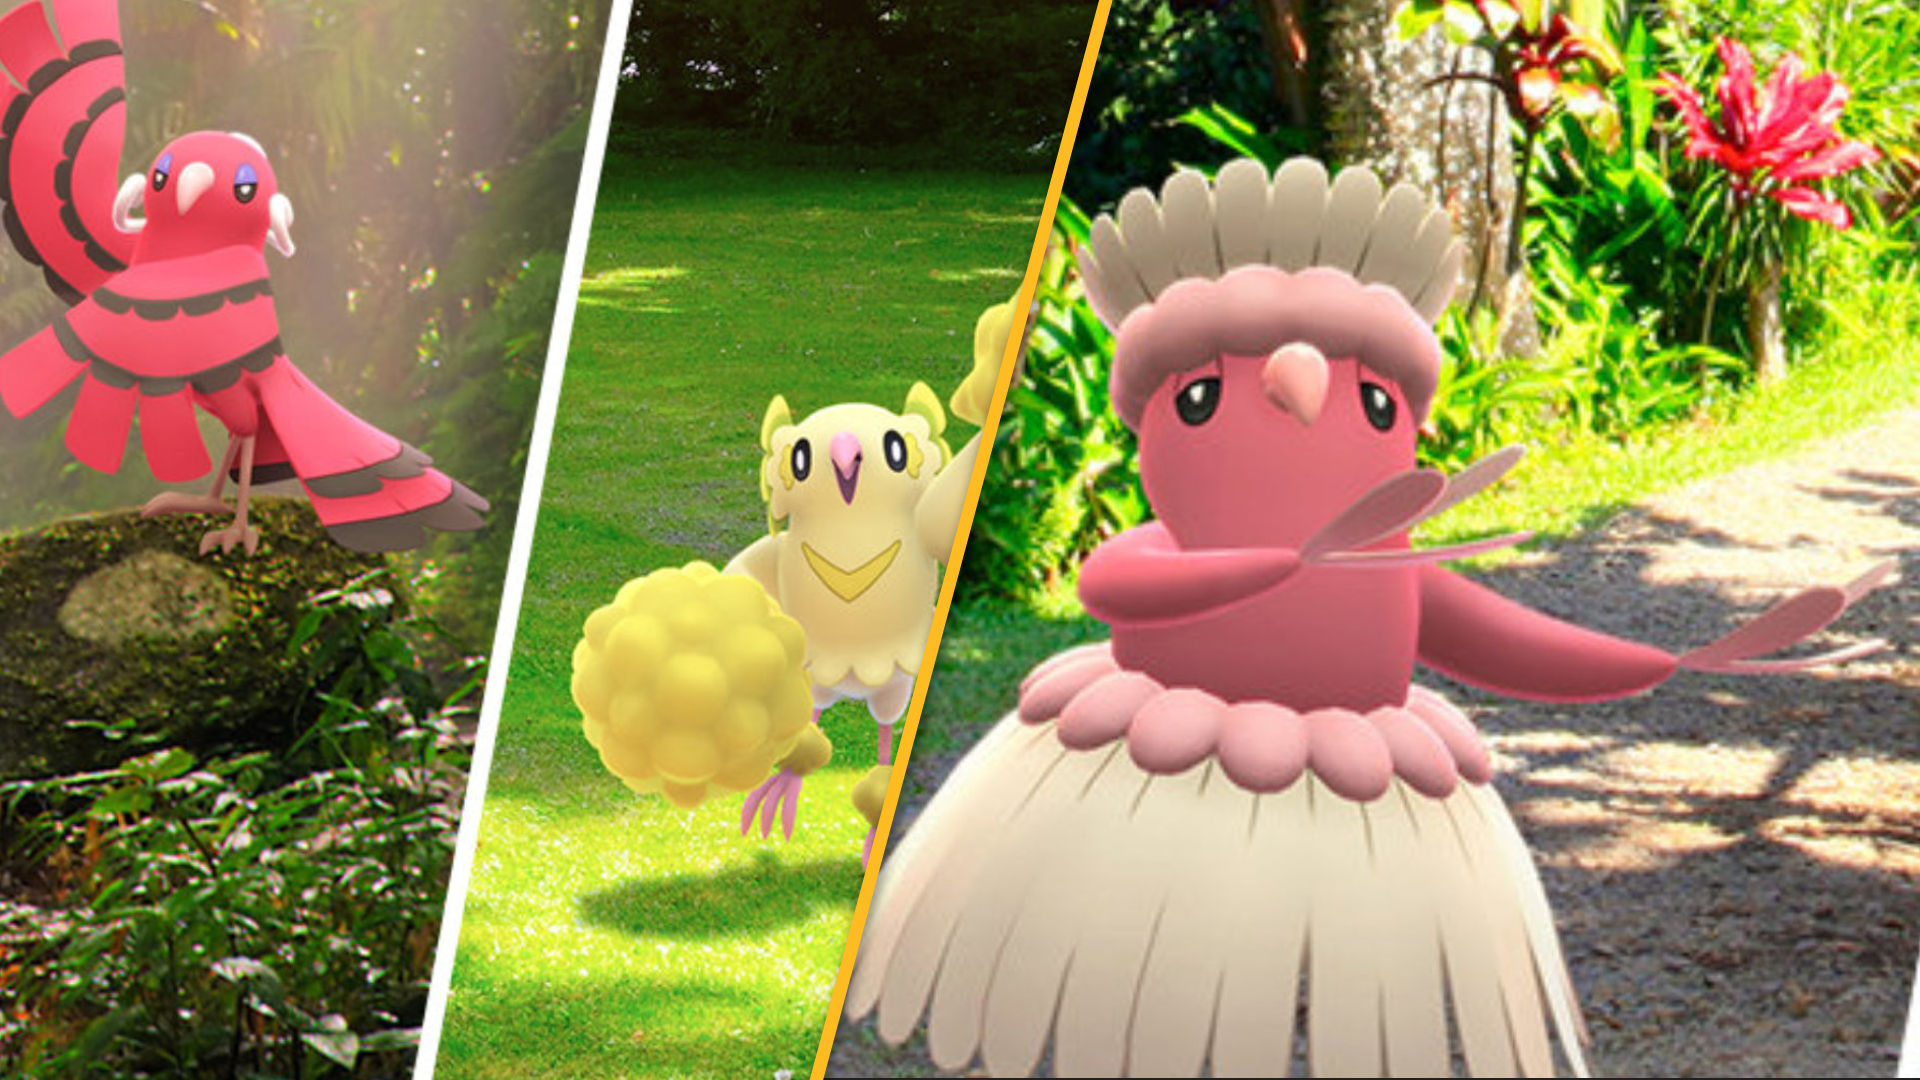 Oricorio makes its Pokémon Go debut in the Festival of Colors Pocket